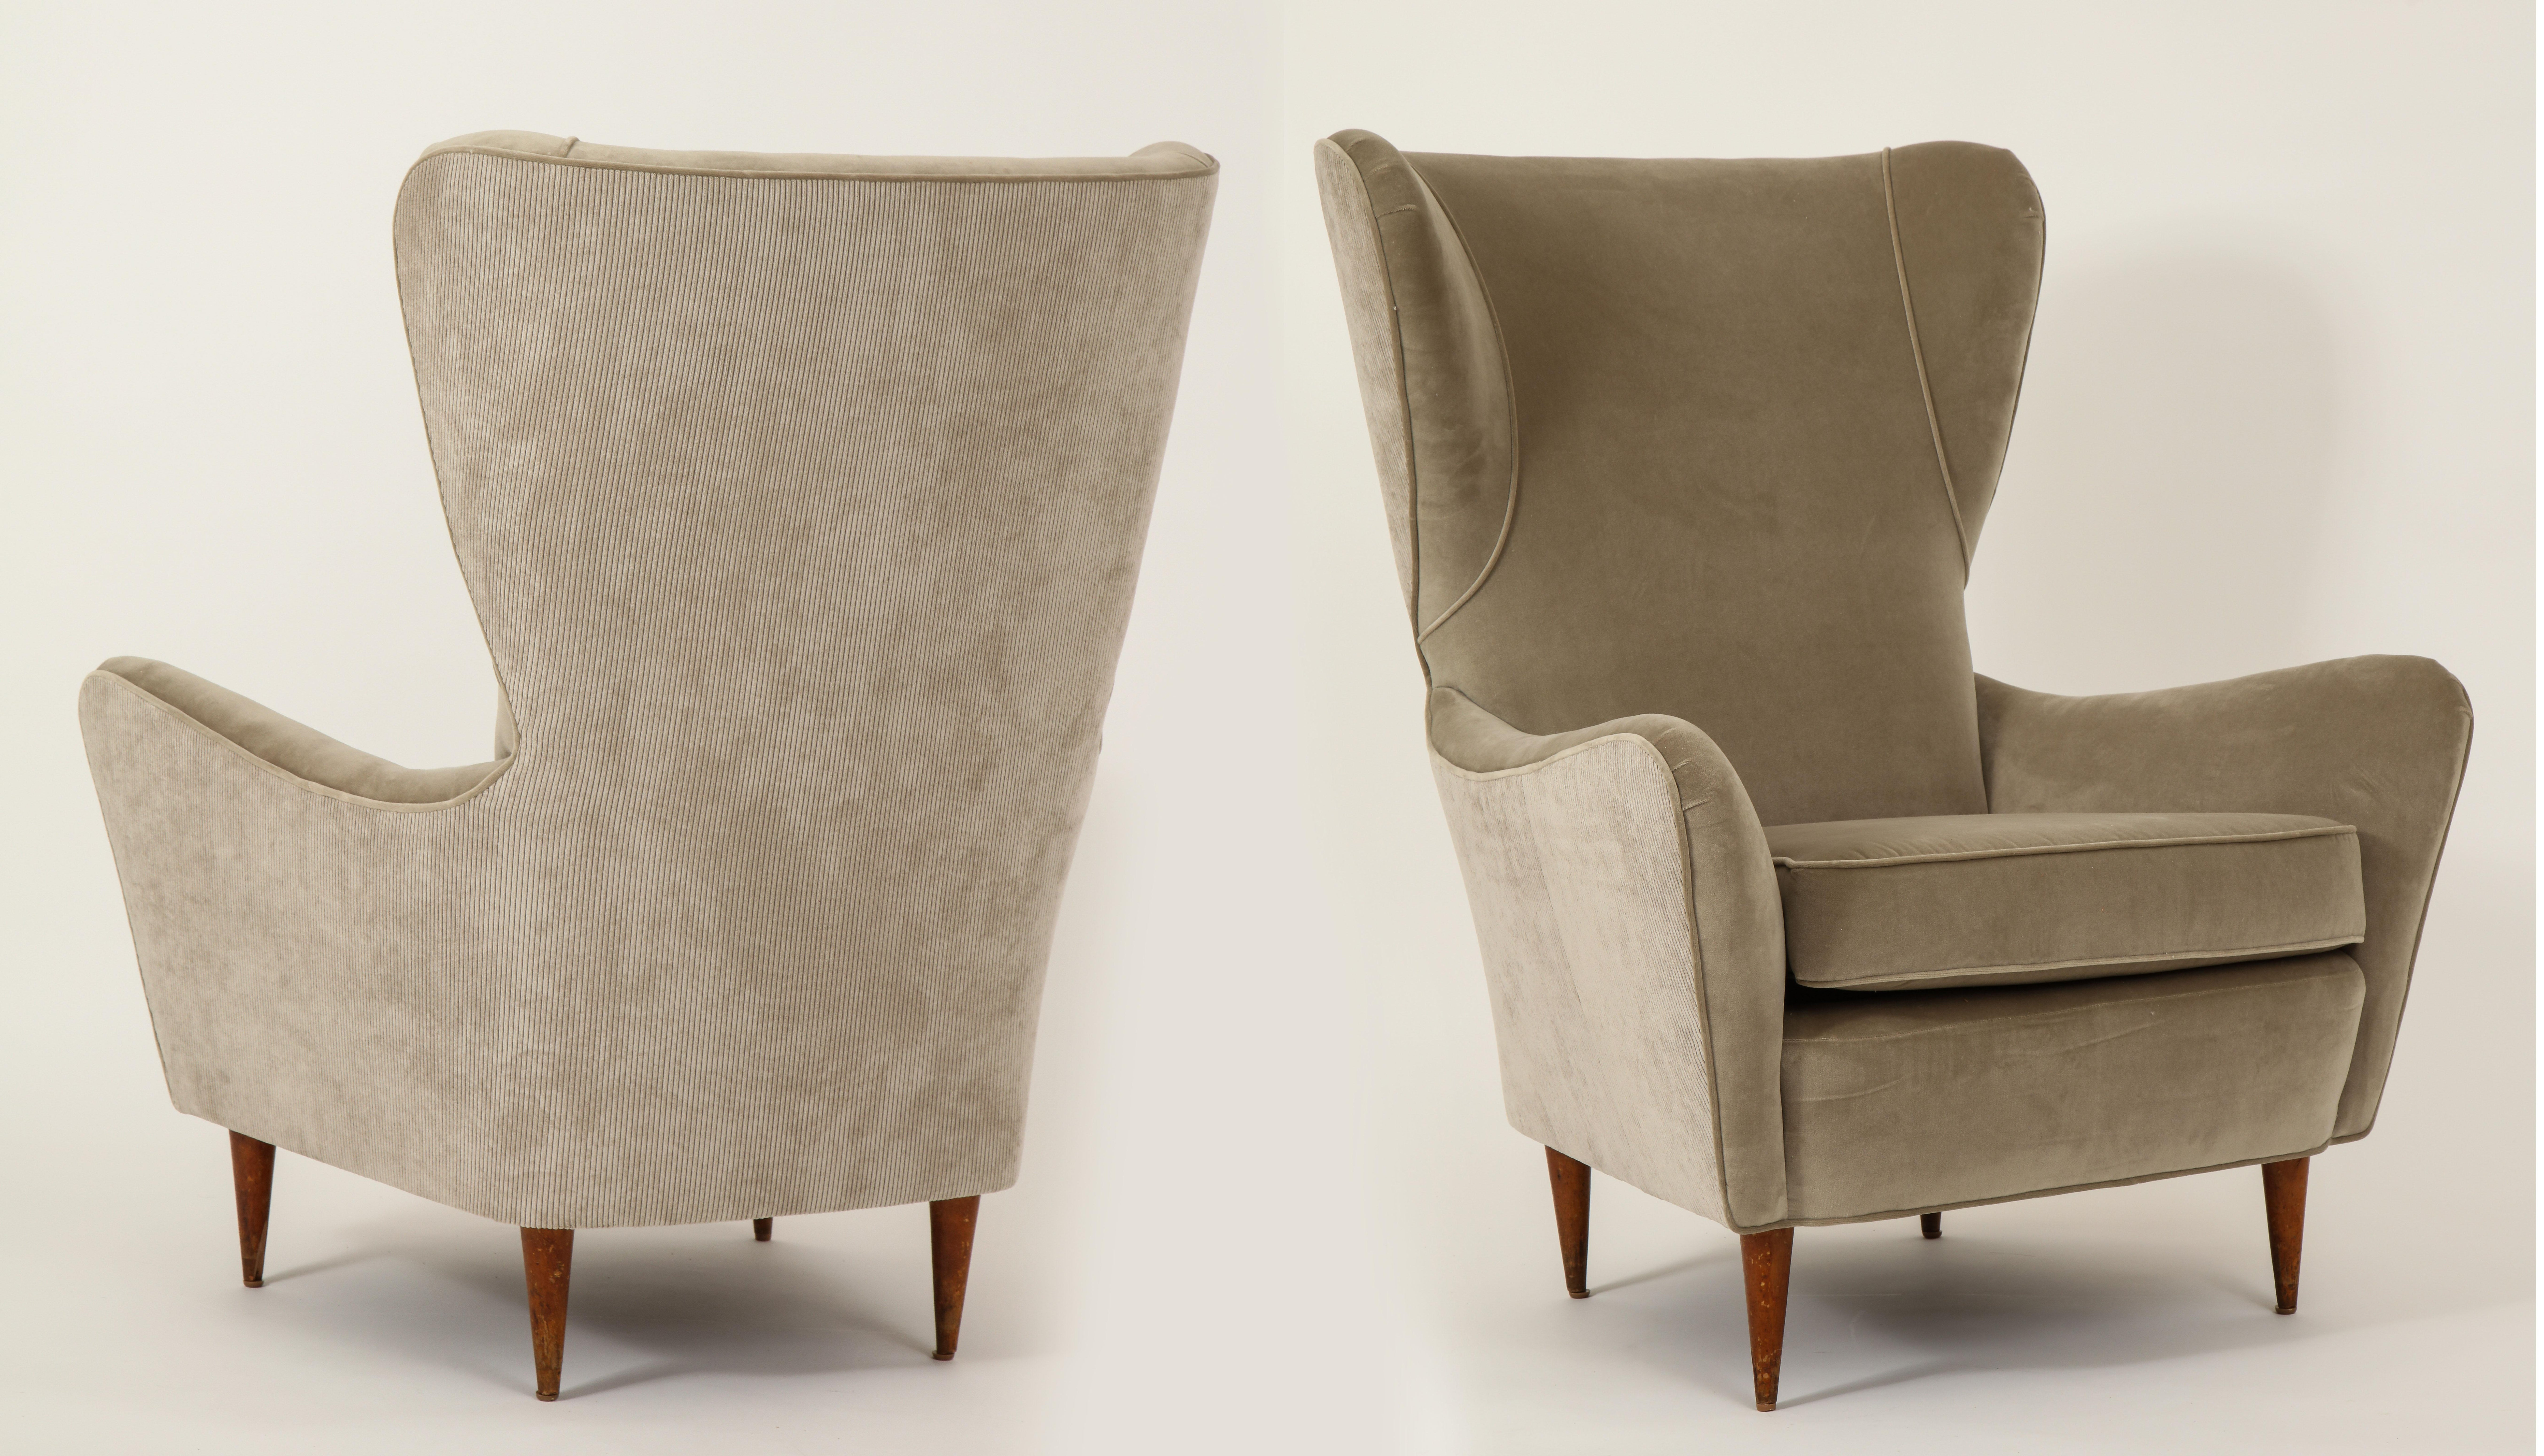 Midcentury Gio Ponti style wing back pair of lounge chairs grey/beige velvet, Italy, 1950s

Beautiful newly upholstered pair of wing back chairs. The front is covered in a buttery grey upholstery, the back is in corduroy grey upholstery. Creating a